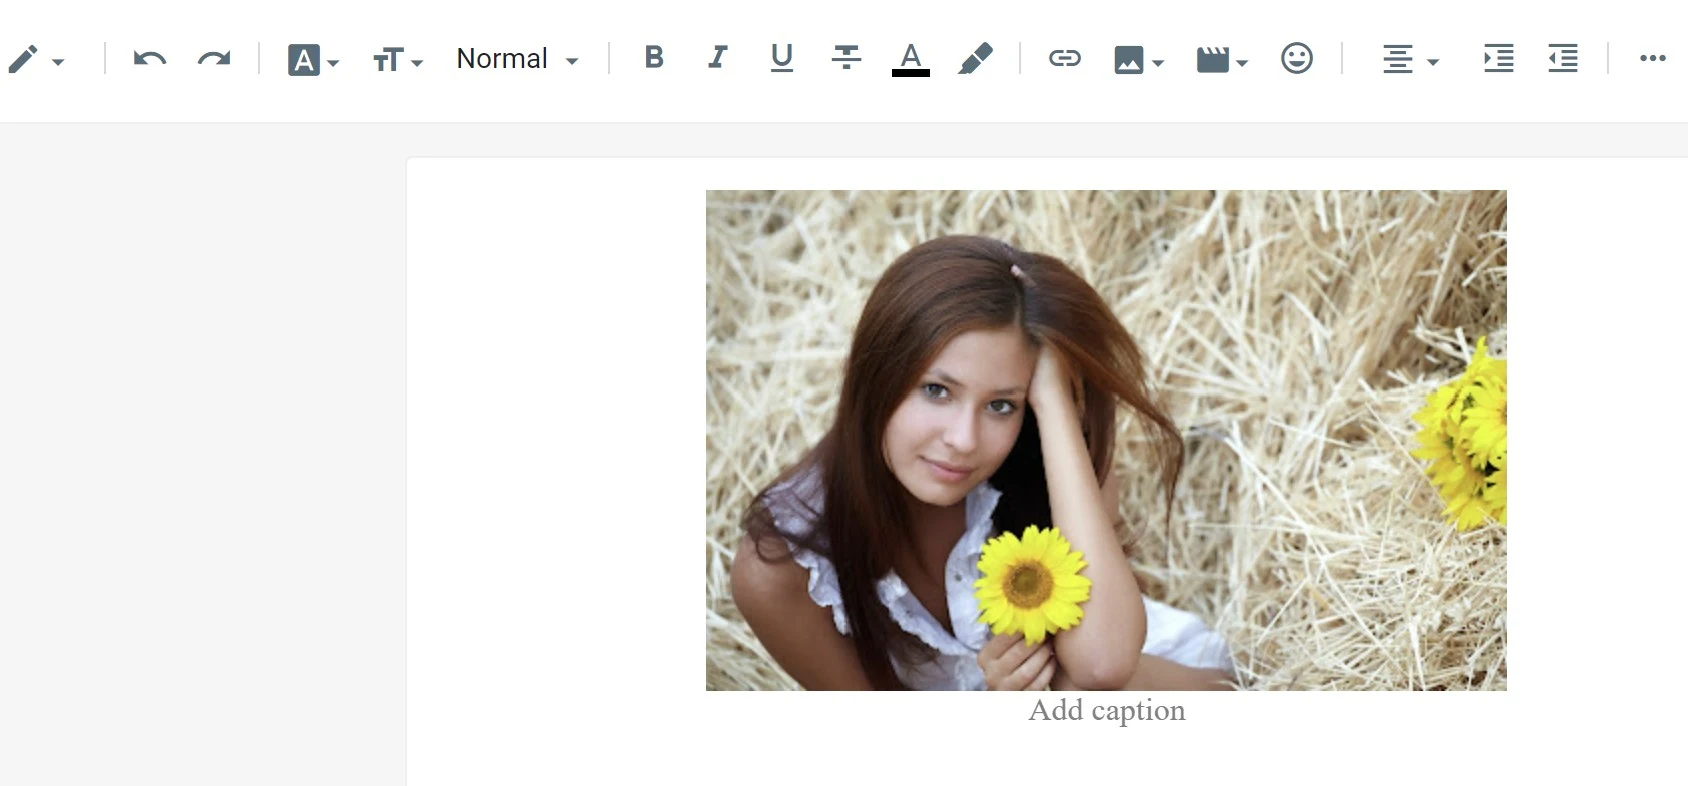 How to add captions to photos